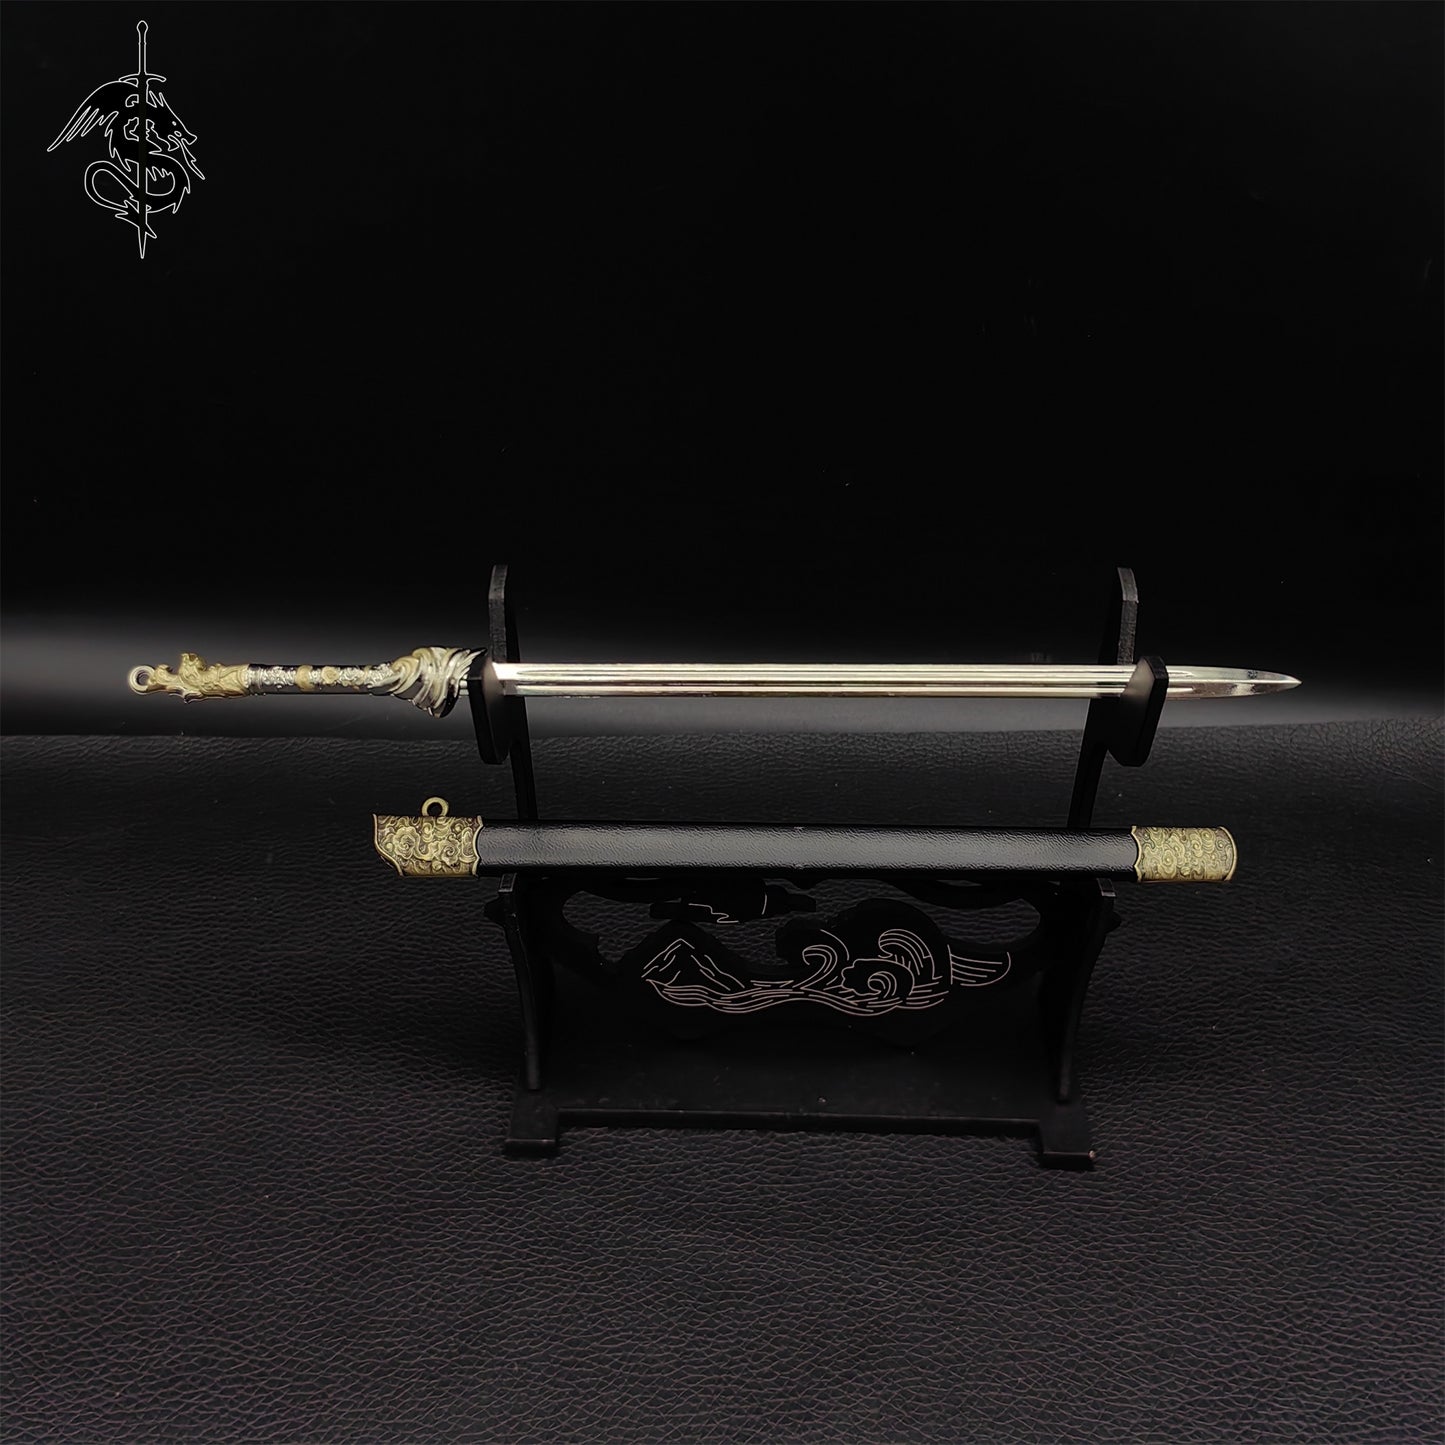 Famous Chinese Film Ningyuanzhou Sword Replica 4 In 1 Pack